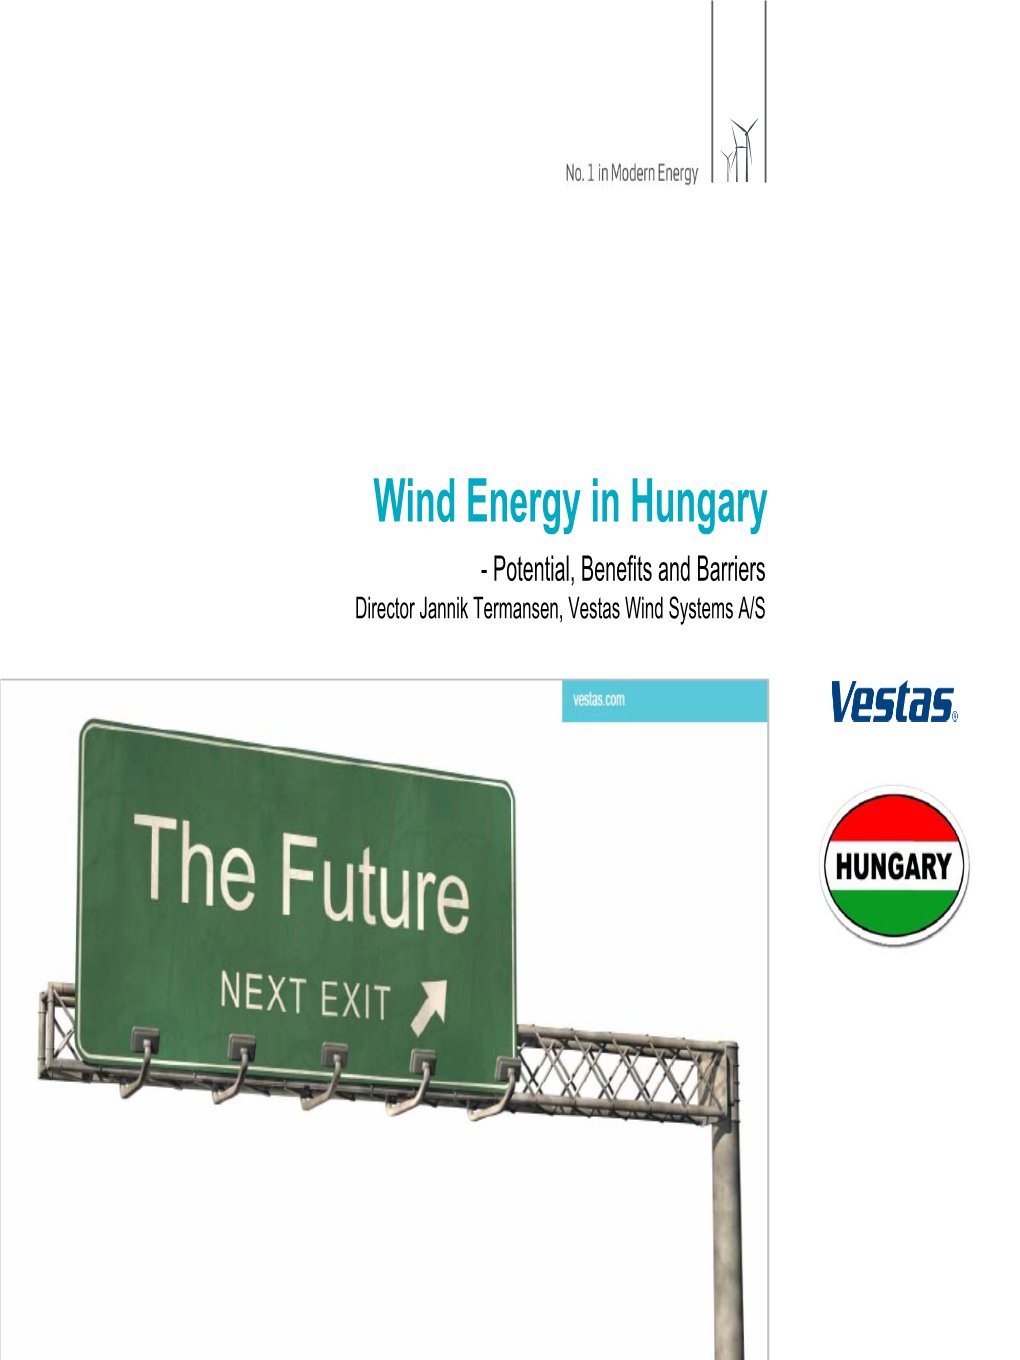 Wind Energy in Hungary - Potential, Benefits and Barriers Director Jannik Termansen, Vestas Wind Systems A/S